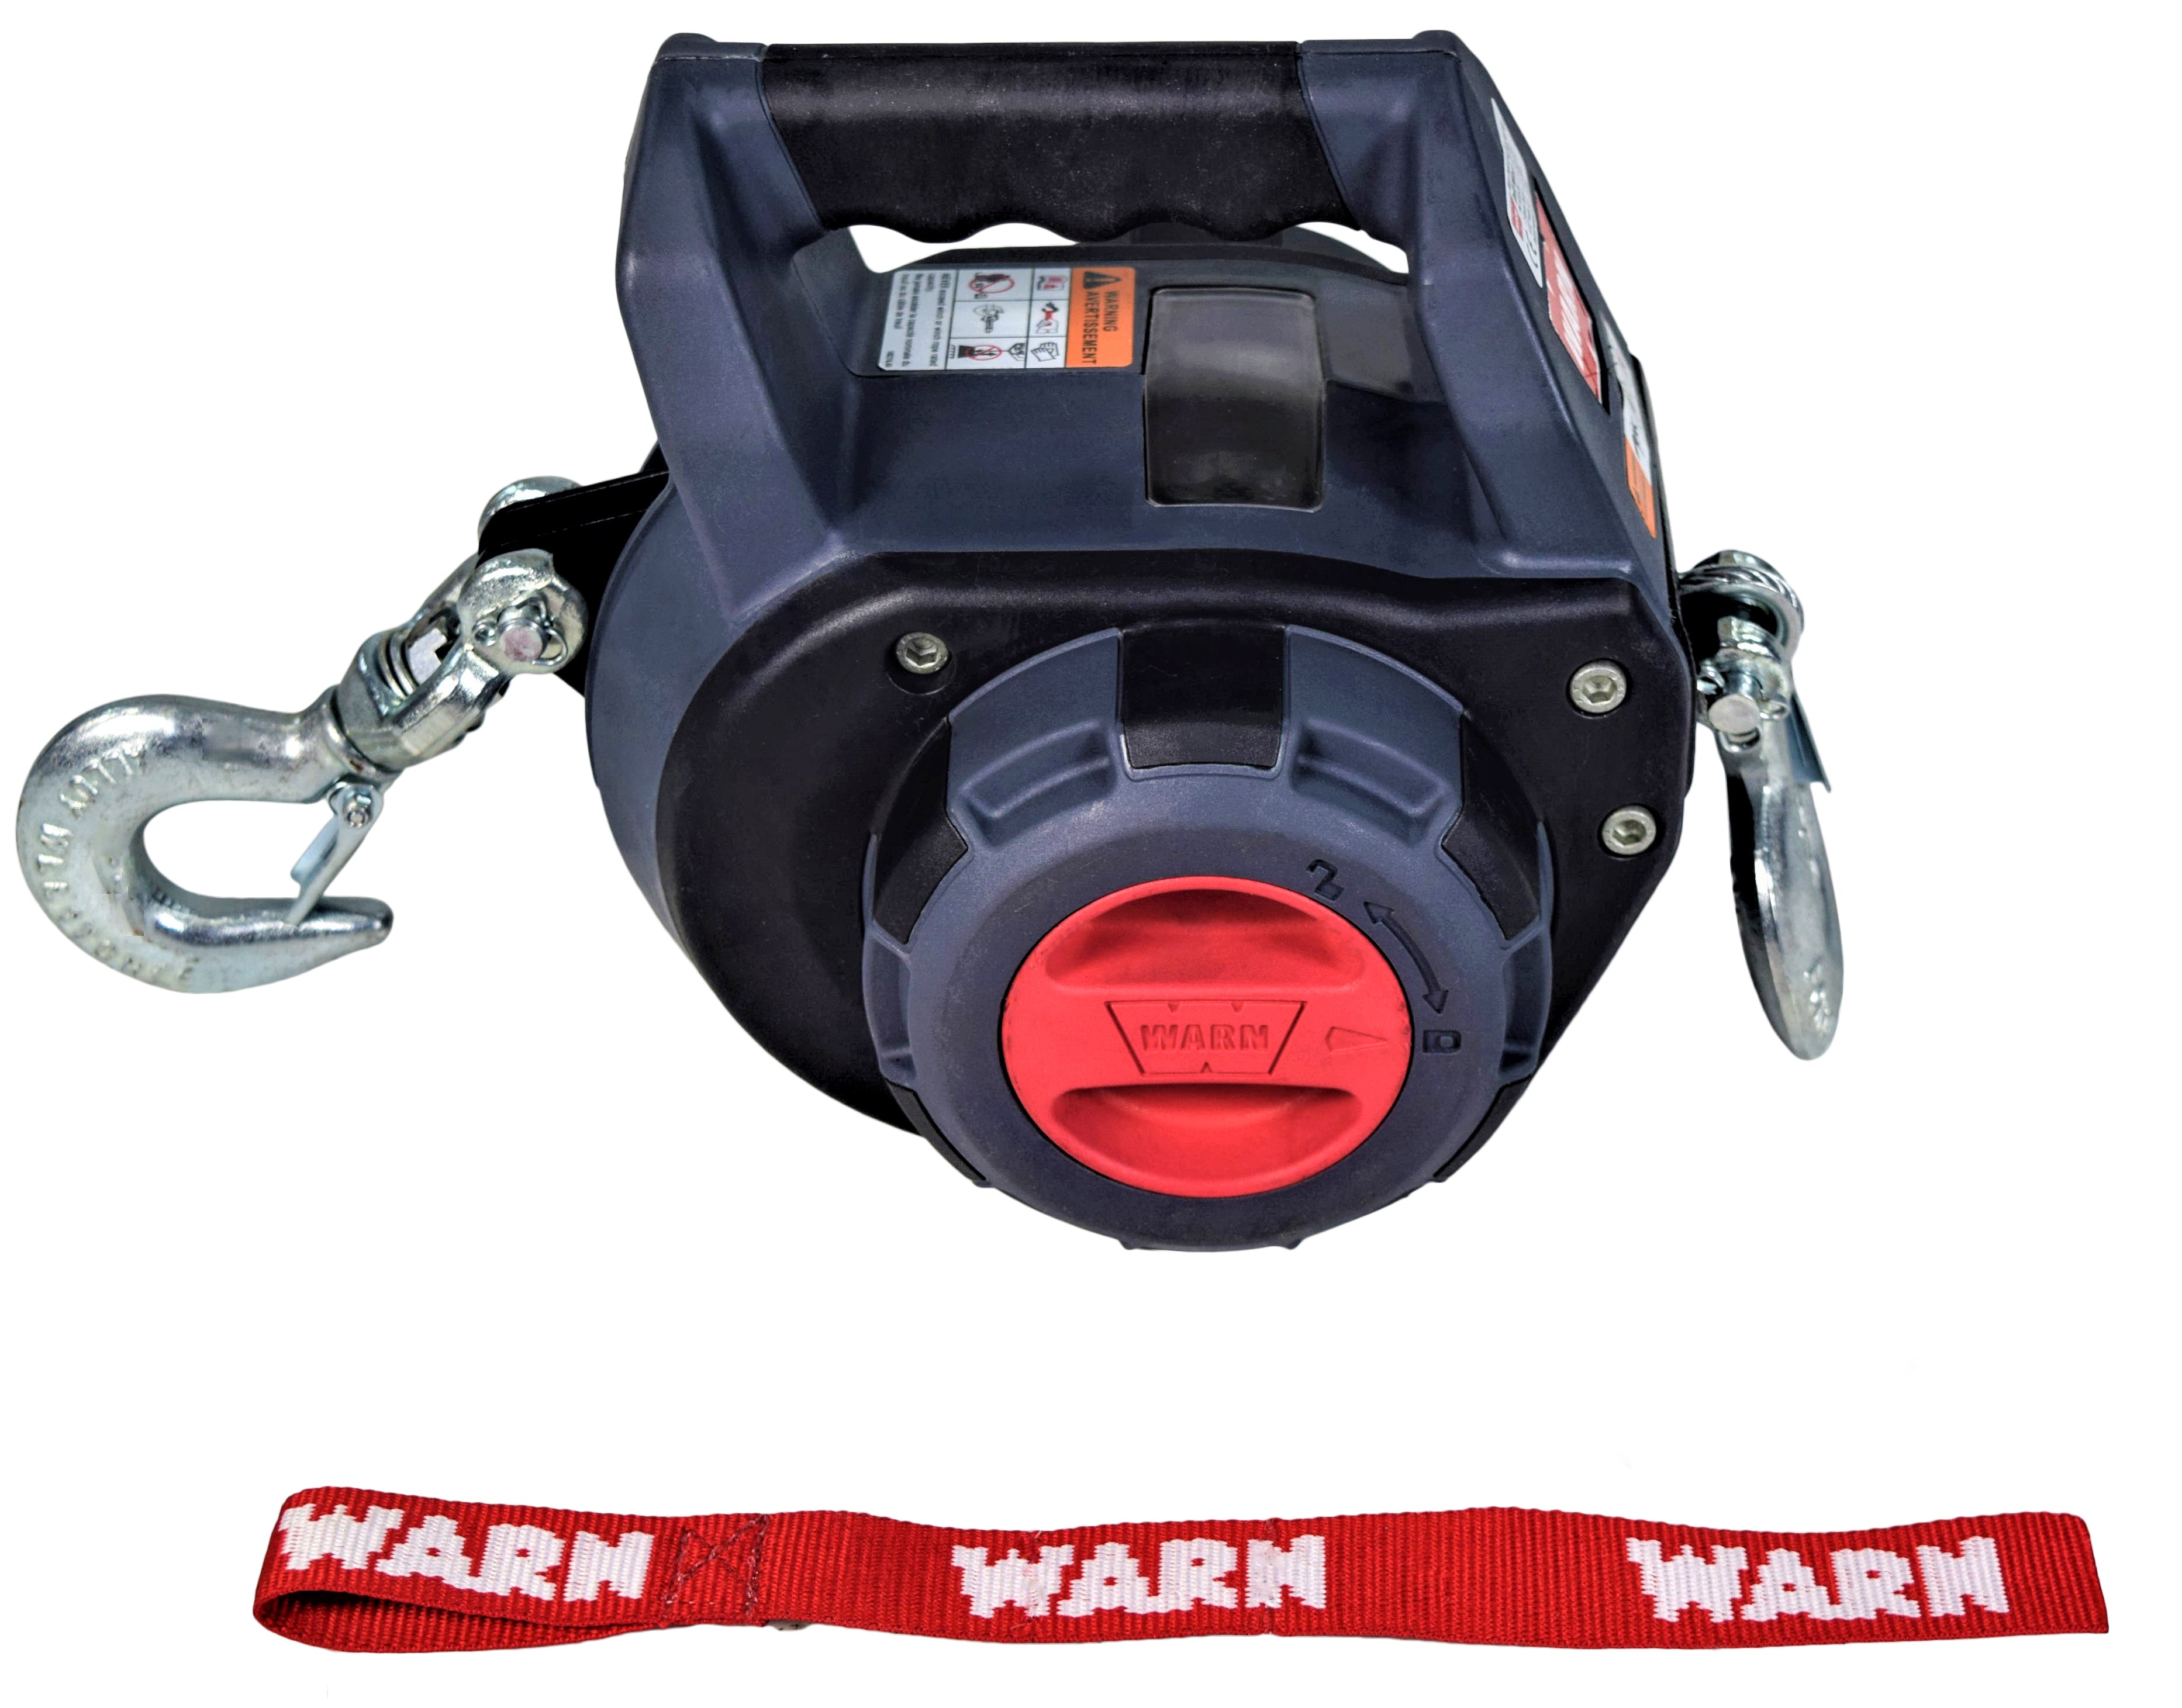 Walkfairy Drill Winch Hoist Portable Drill Winch of 750 LB Capacity with 40  Feet Steel Wire Drill Winch for Lifting & Dragging 